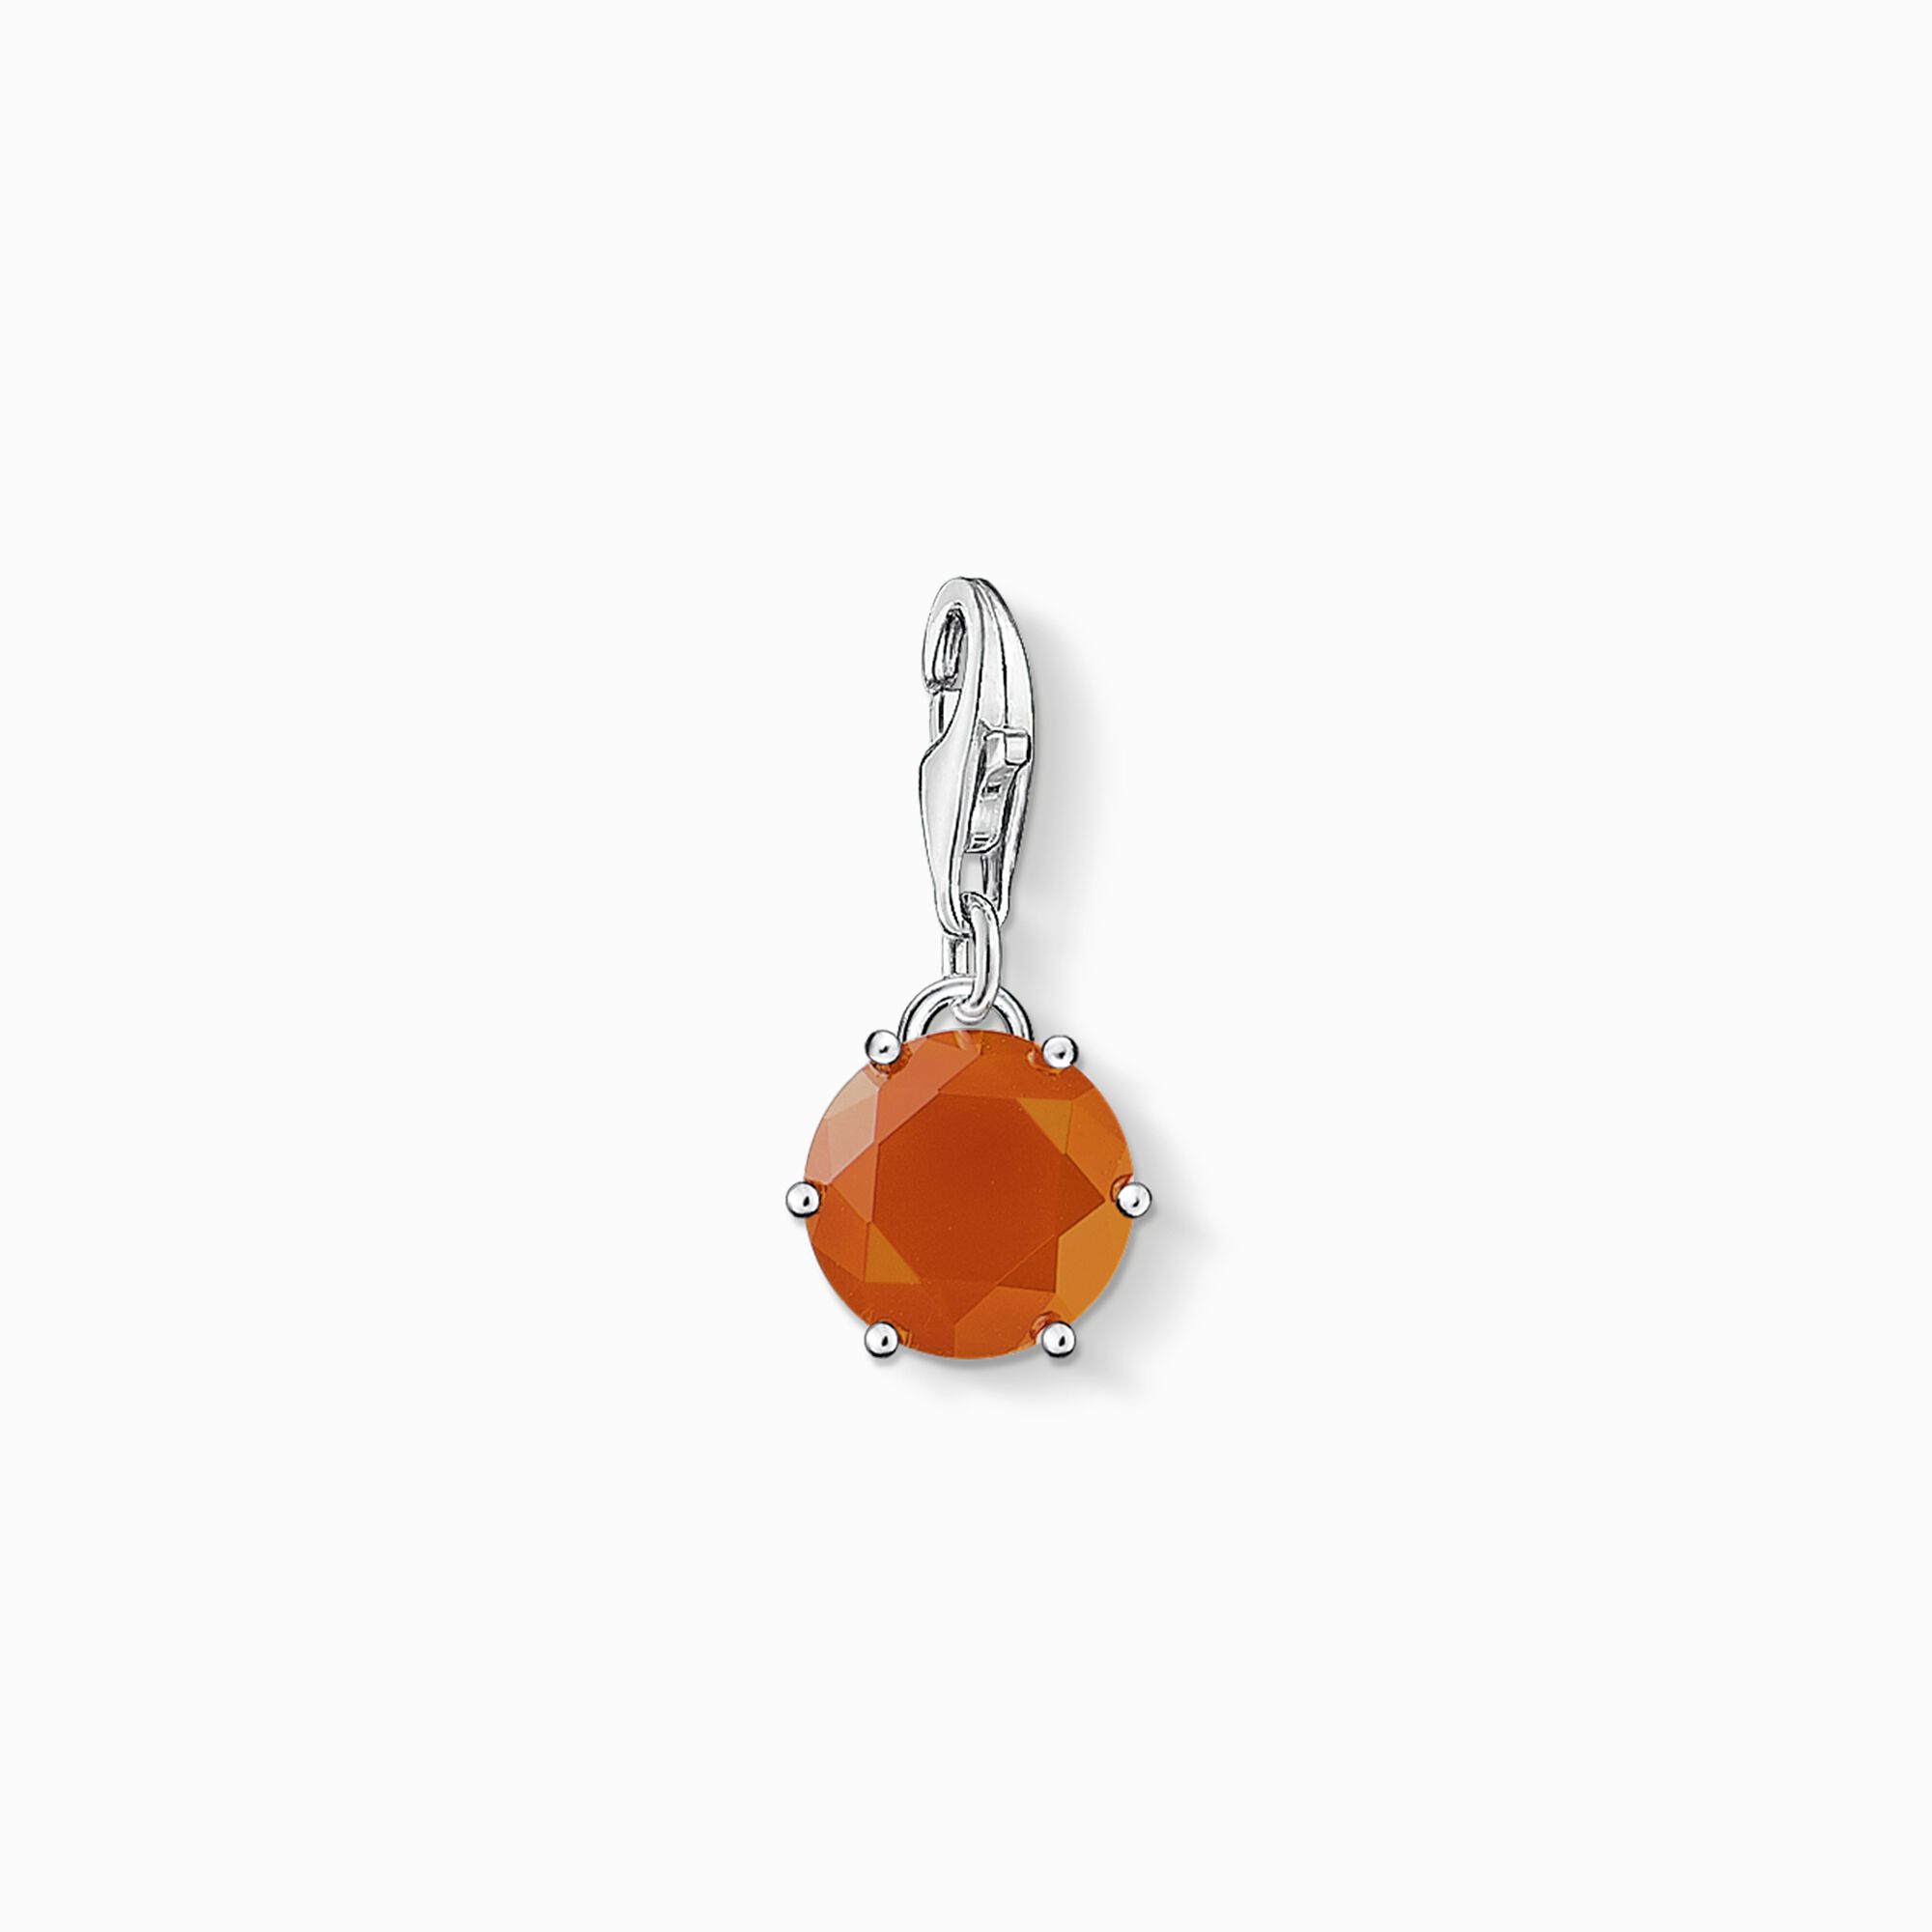 Charm pendant birth stone January from the Charm Club collection in the THOMAS SABO online store